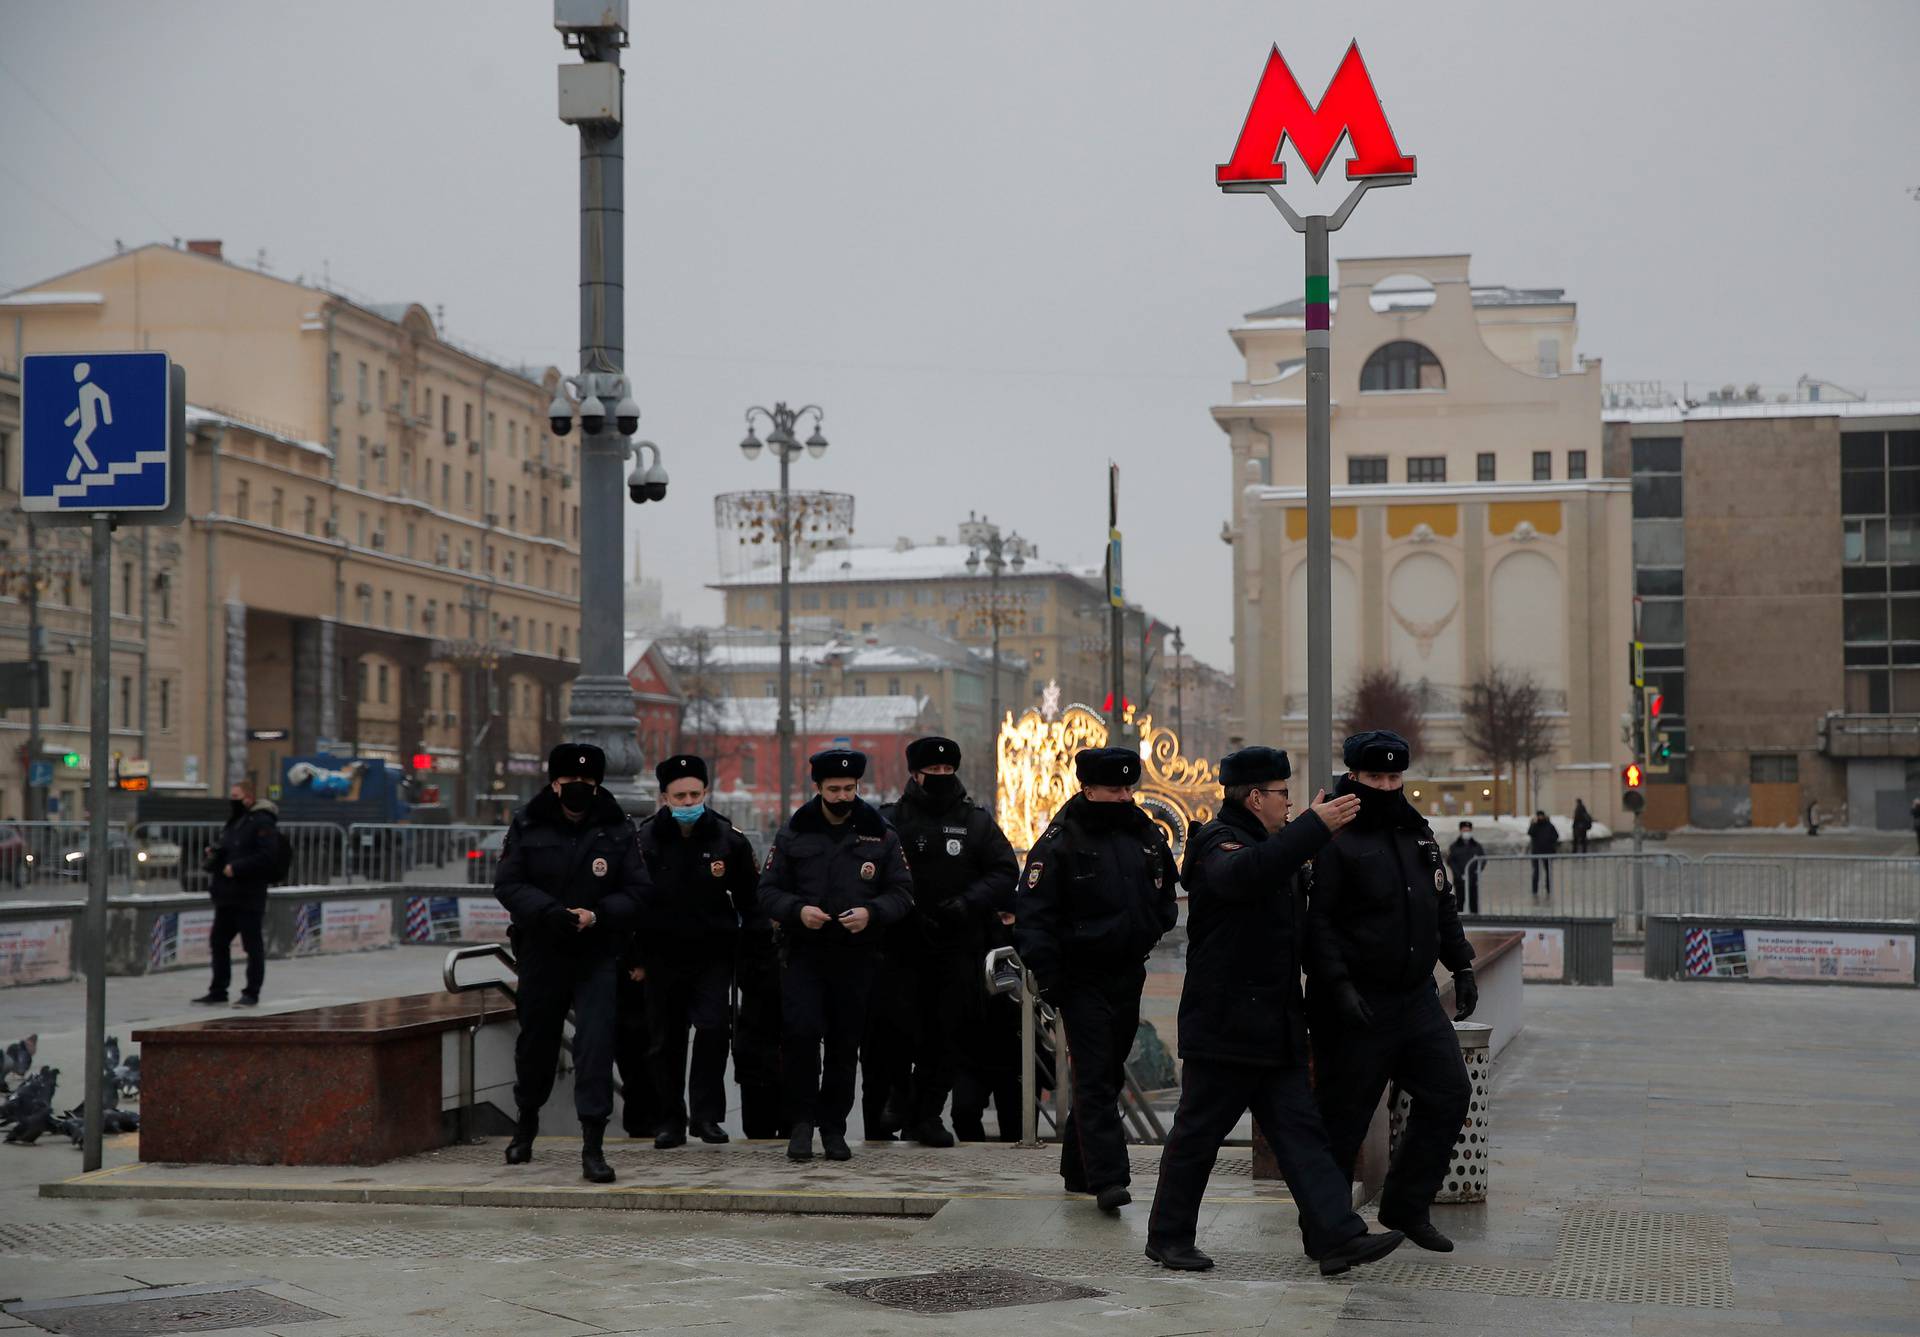 Police officers walk out of the underpass as supporters of opposition leader Navalny are expected to protest in Moscow